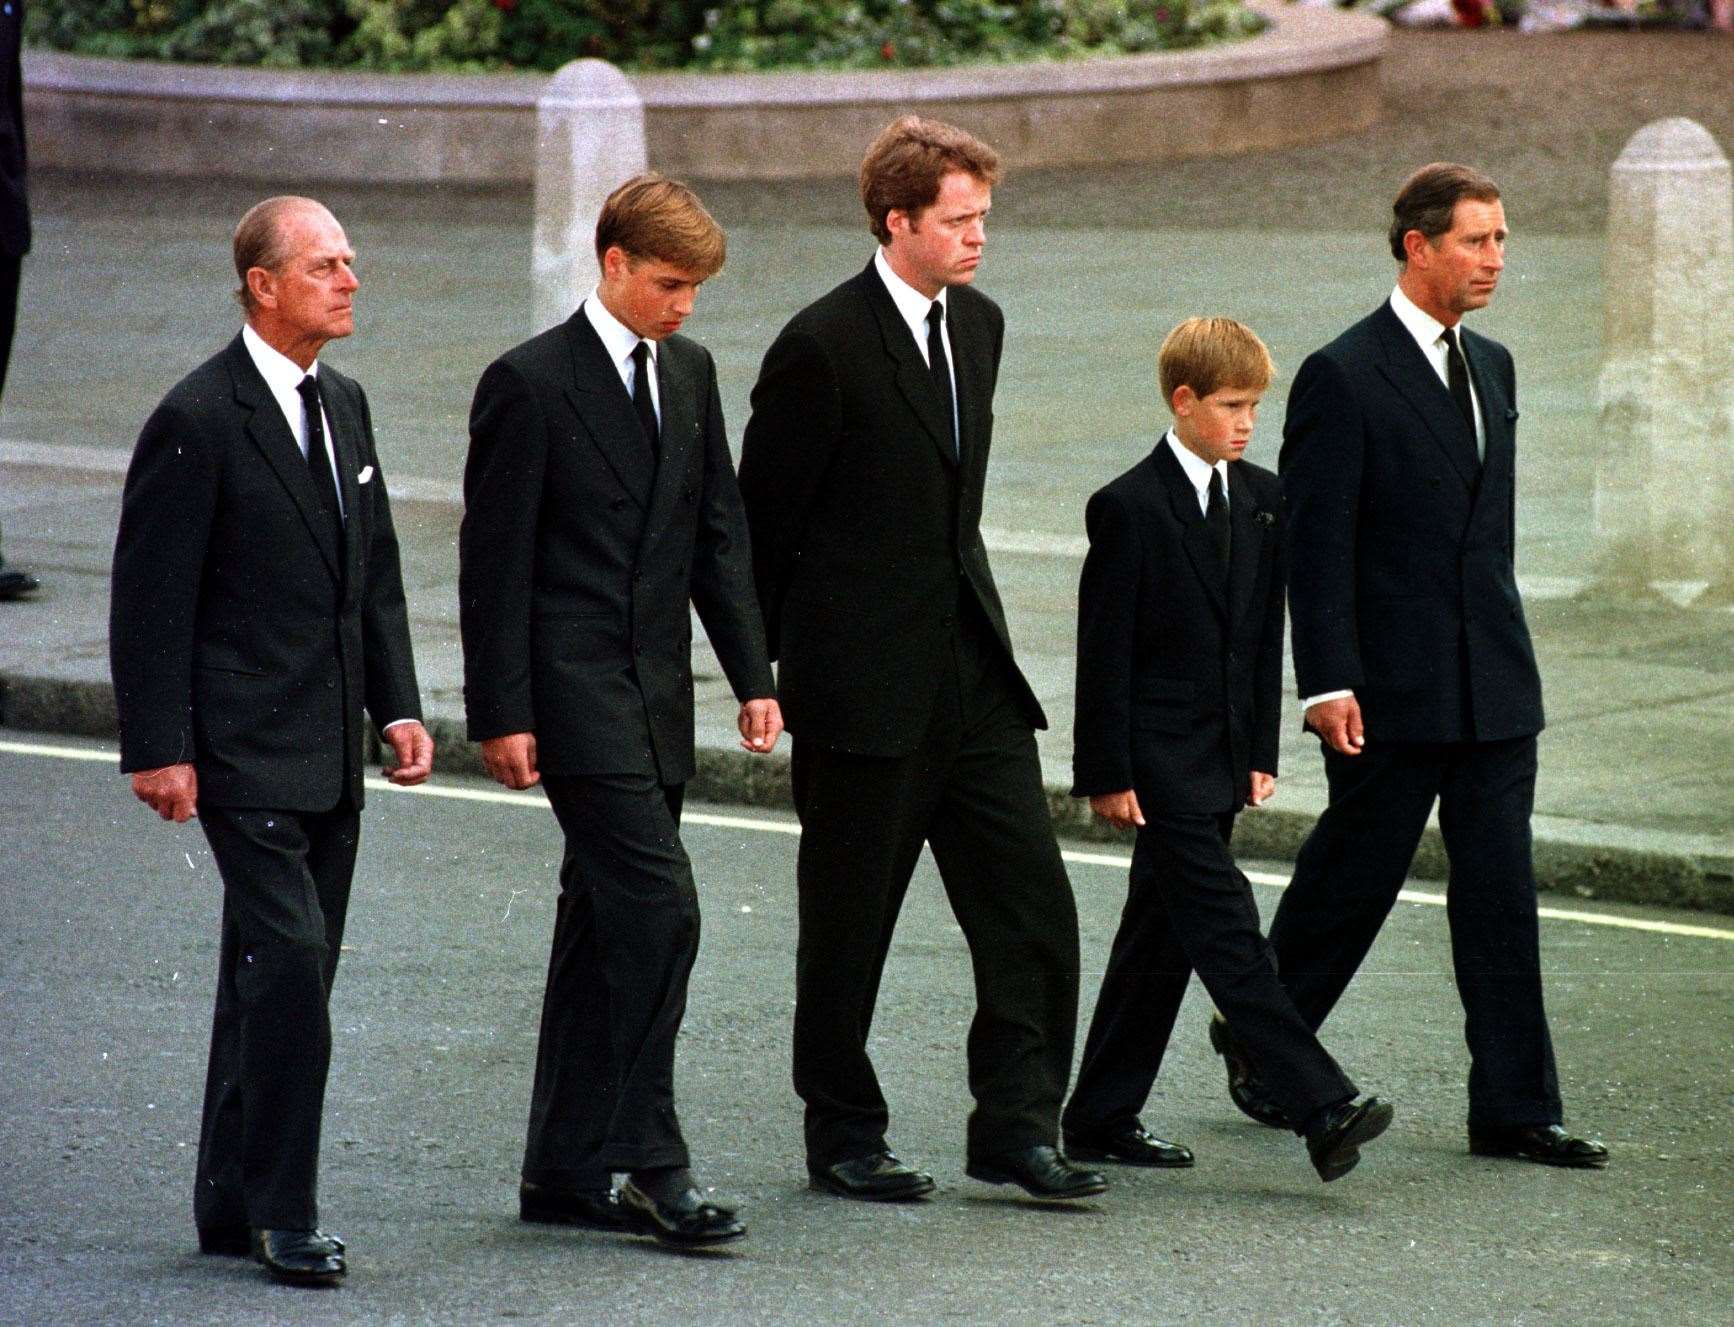 William and Harry joining the procession behind Diana’s coffin on the day of her funeral (Adam Butler/PA)